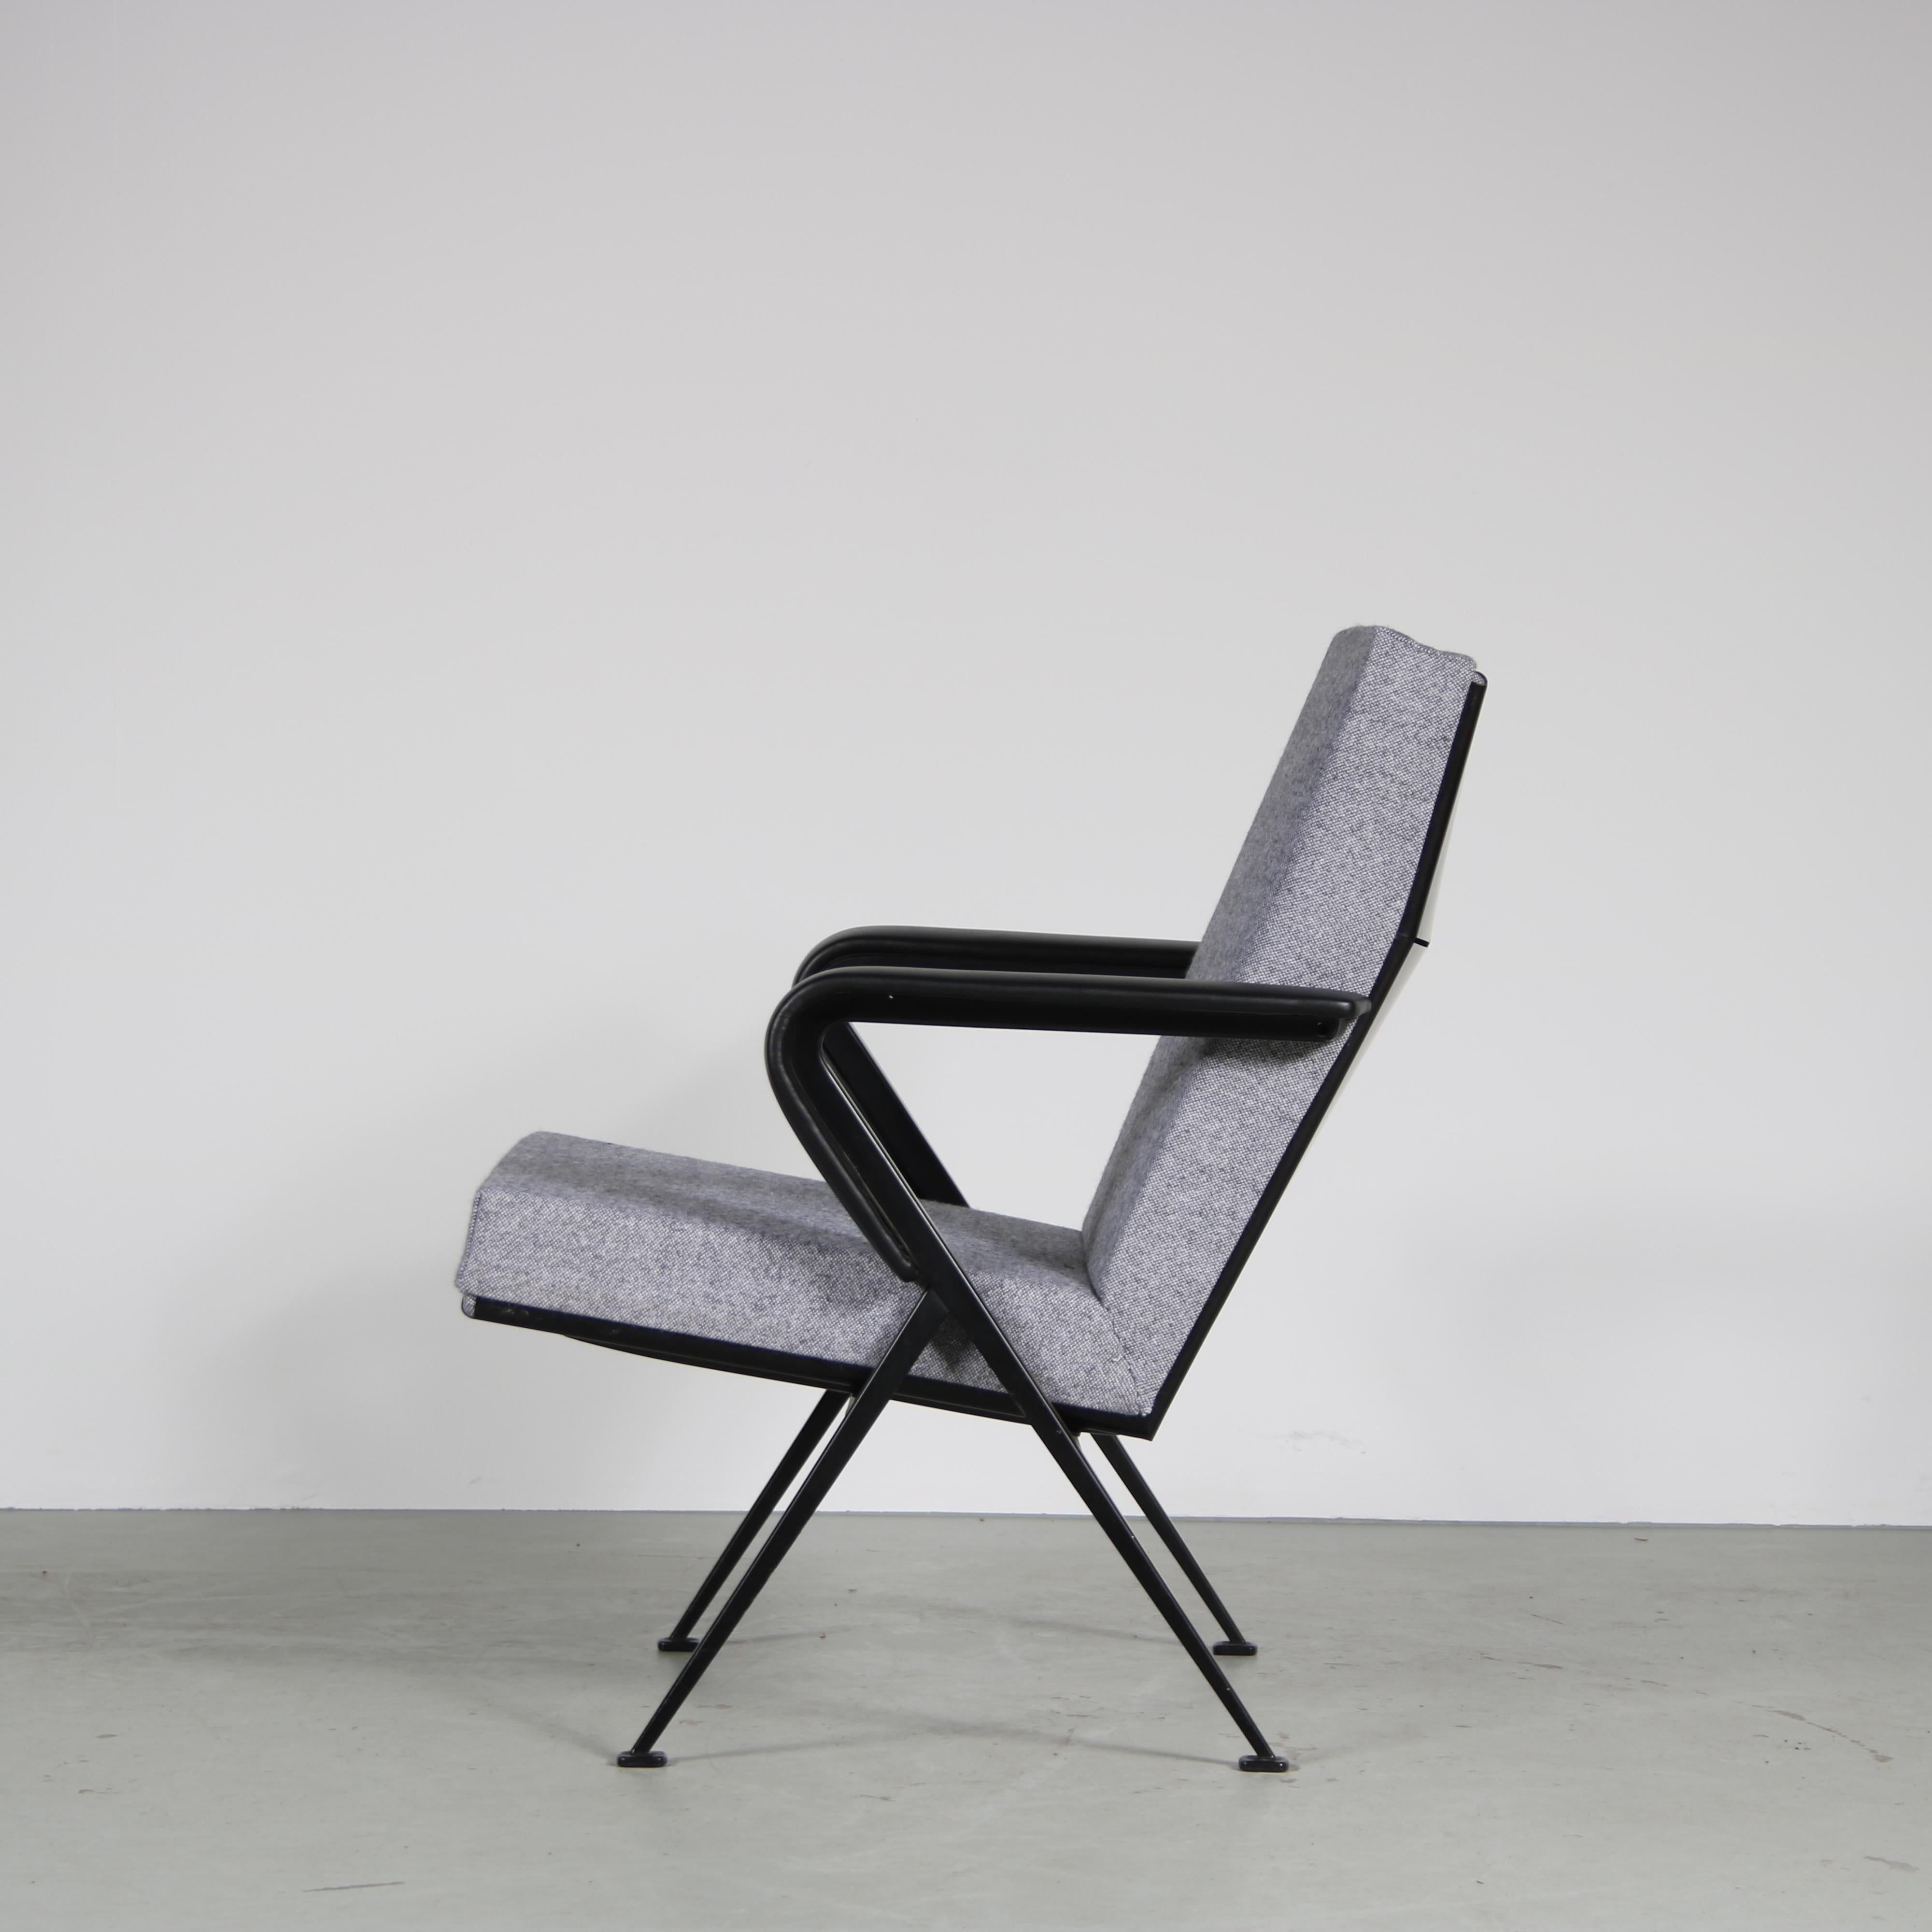 1960s “Repose” Chairs by Friso Kramer for Ahrend de Cirkel, Netherlands In Good Condition For Sale In Amsterdam, NL